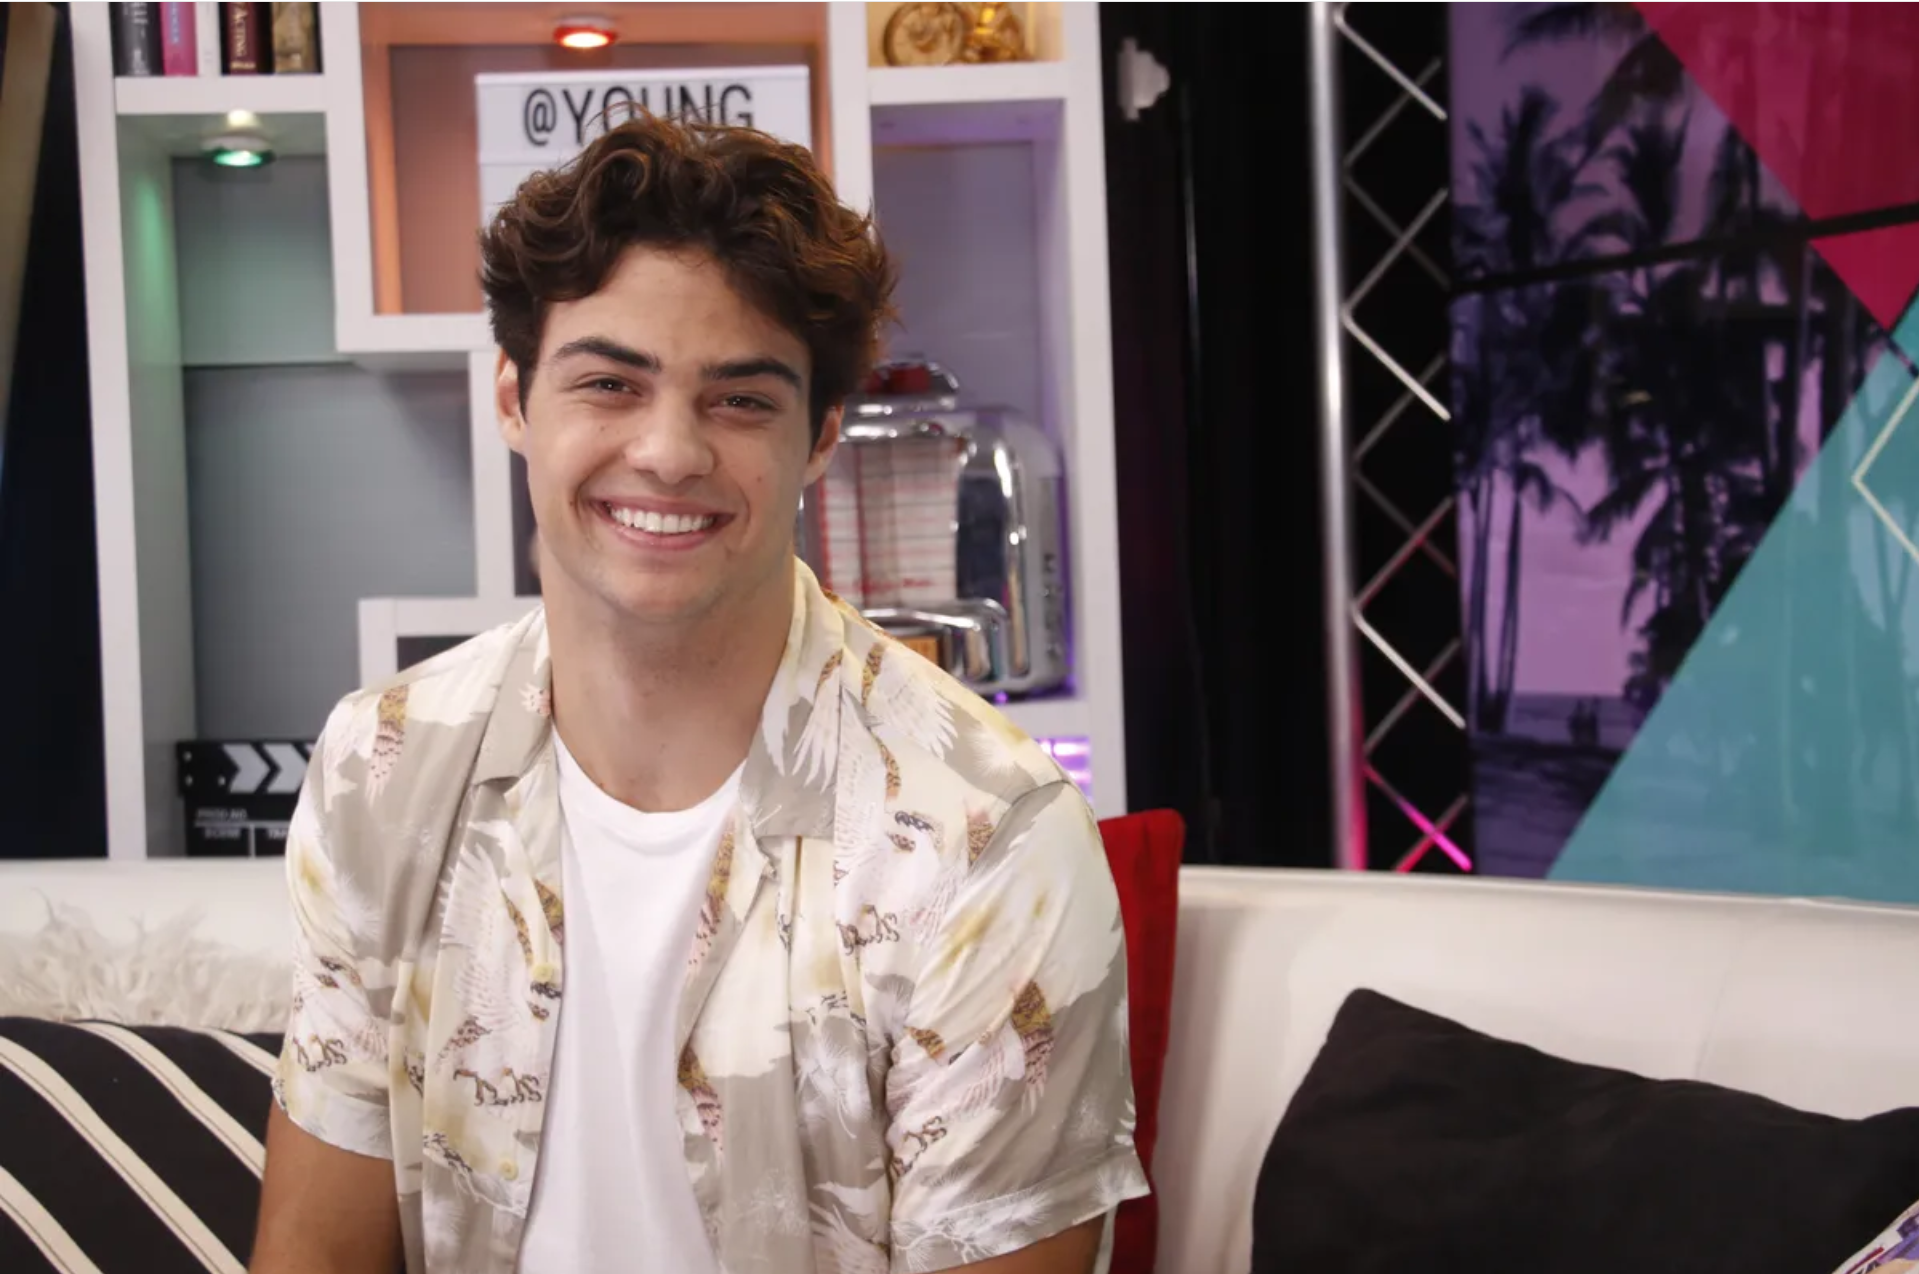 The Noah Centineo Hair Journey Continues: Buzzcut Season.